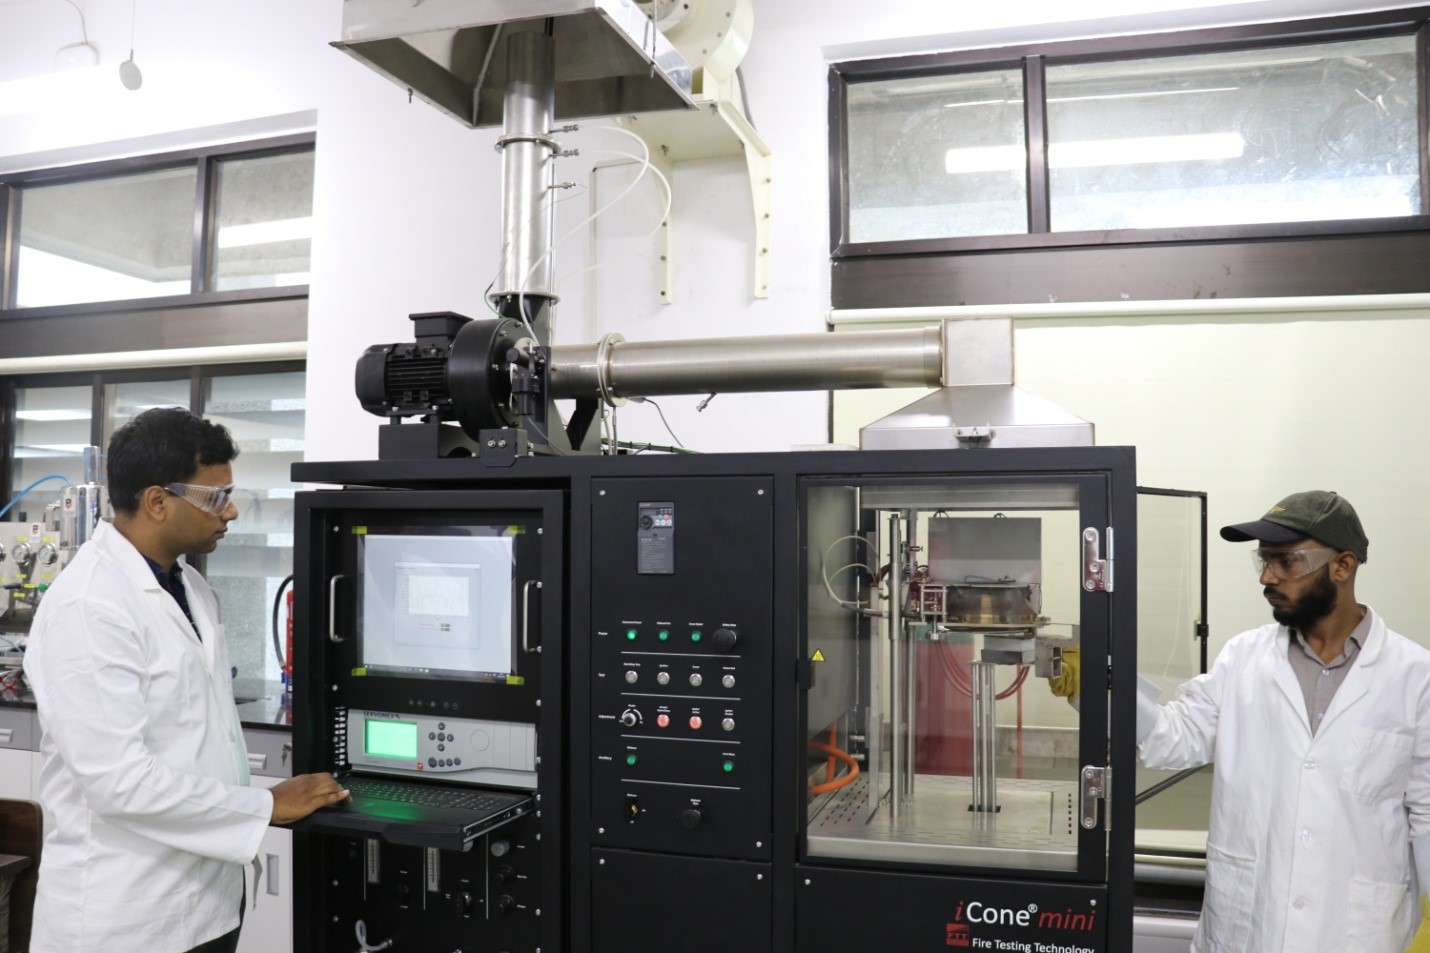 Dr. Gaurav Srivastava and Nasar Ahmad Khan in their laboratory with a Cone Calorimeter, which is used to measure combustion properties of materials